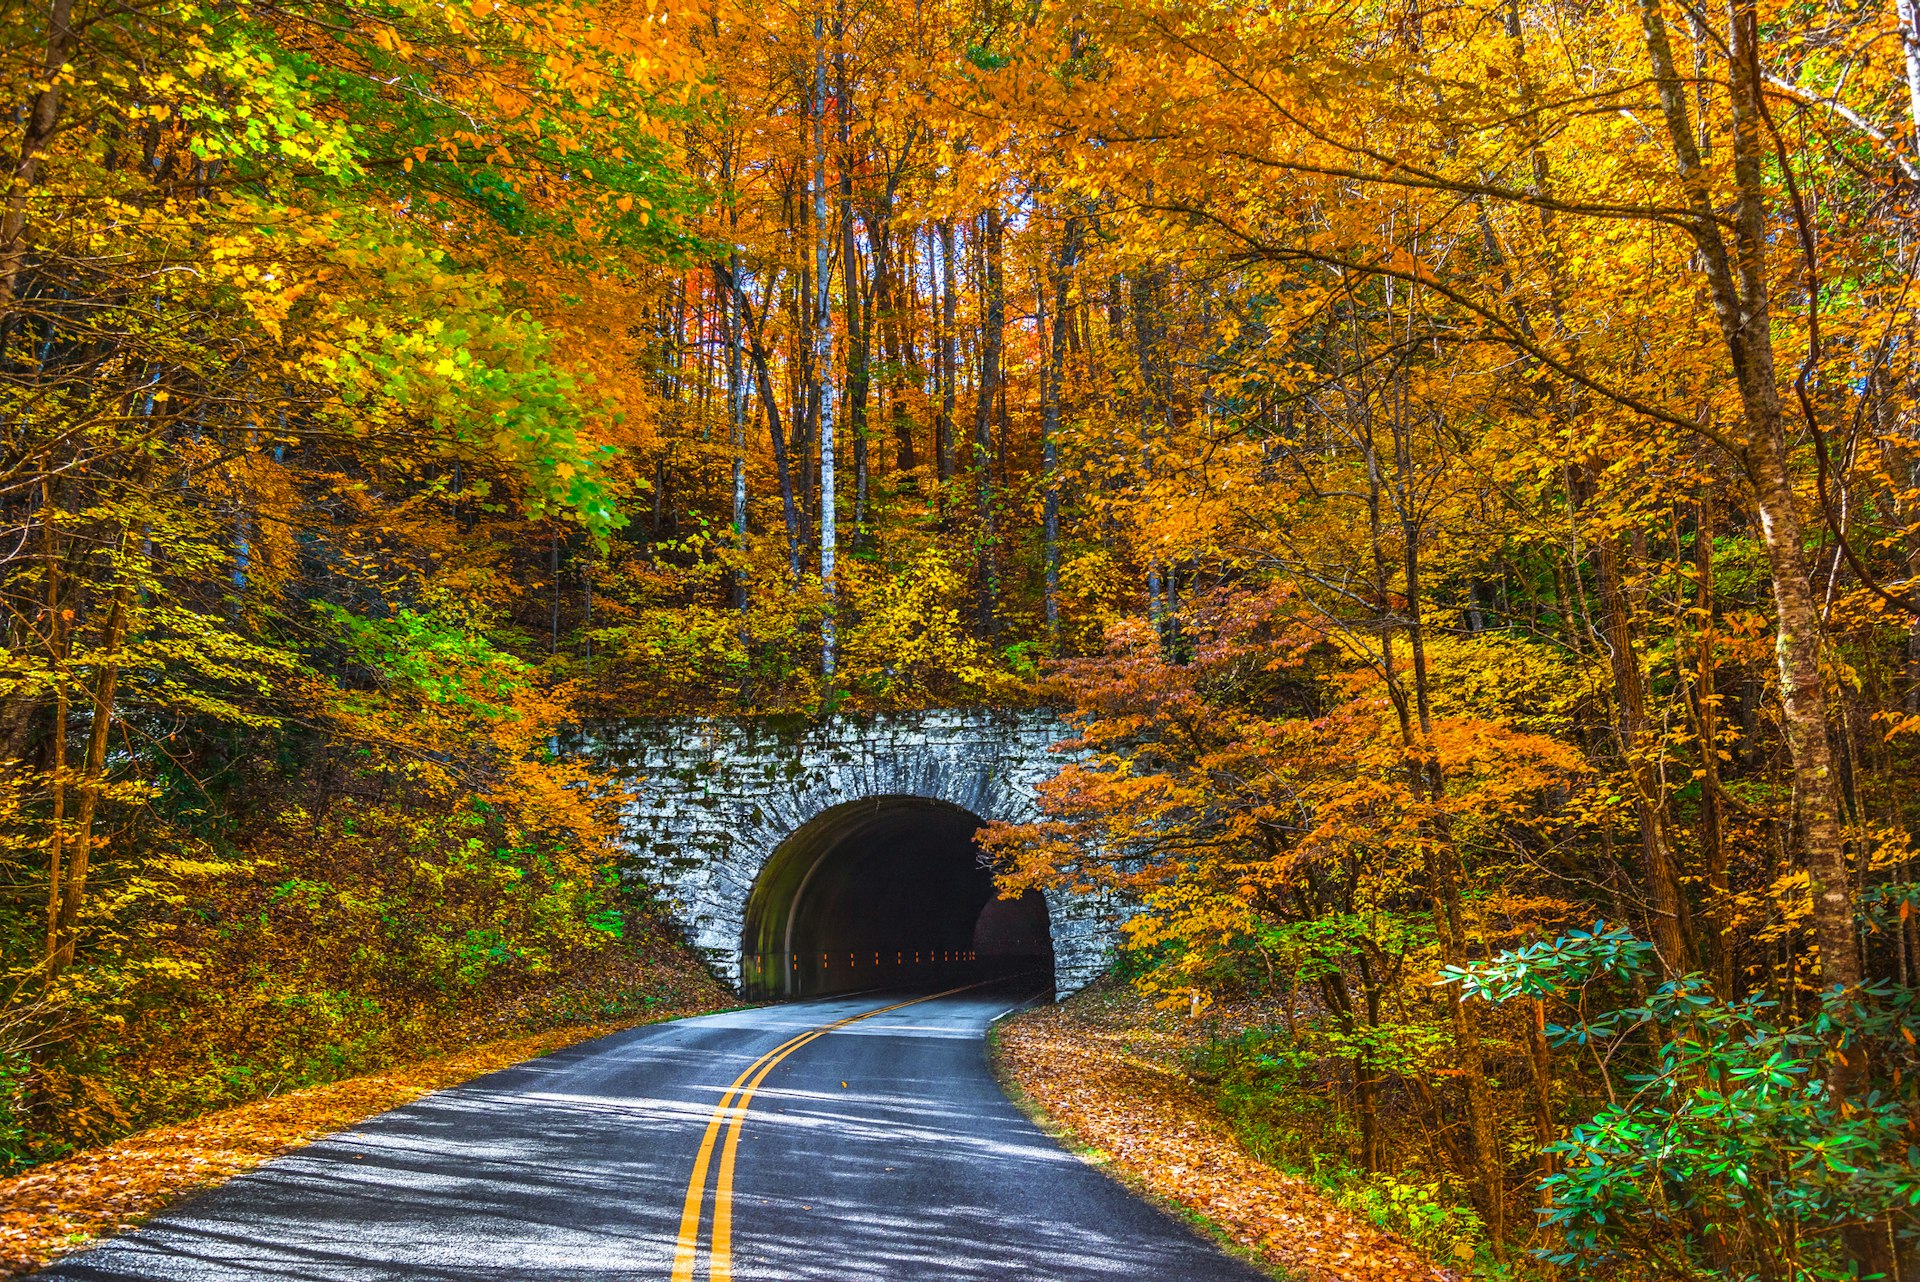 An empty road leading into a tunnel during fall, where the foliage is gold, yellow and orange